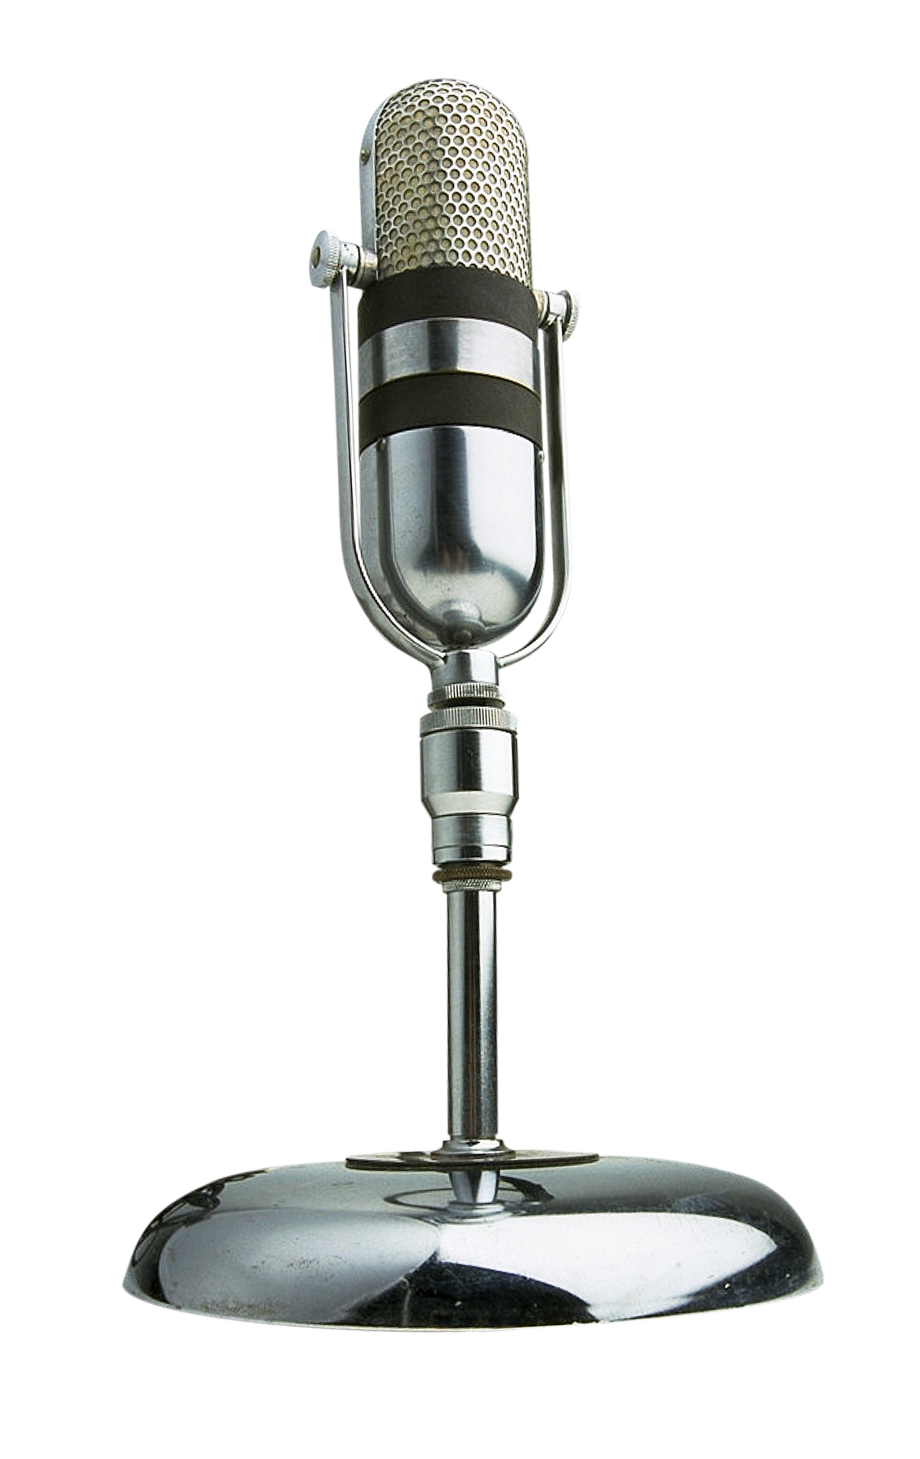 Old Microphone Png Transparent Image - Microphone, Transparent background PNG HD thumbnail